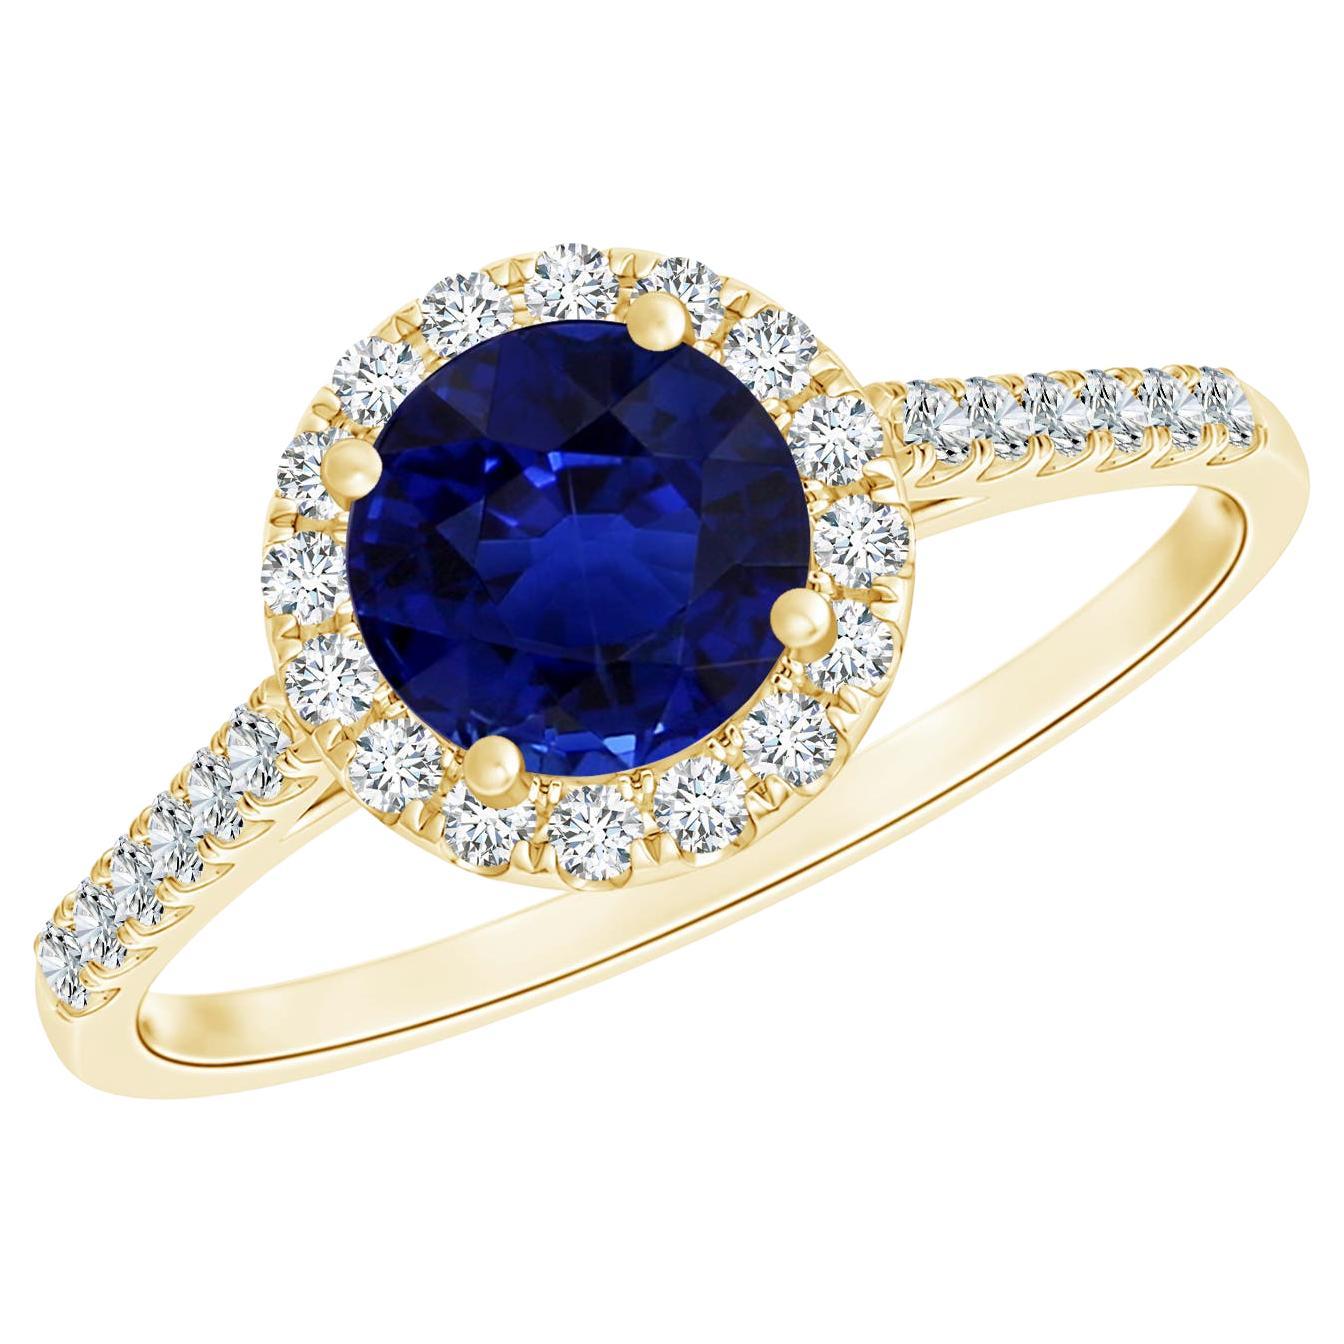 Angara GIA Certified Natural Sapphire & Diamond Halo Ring in Solid Yellow Gold